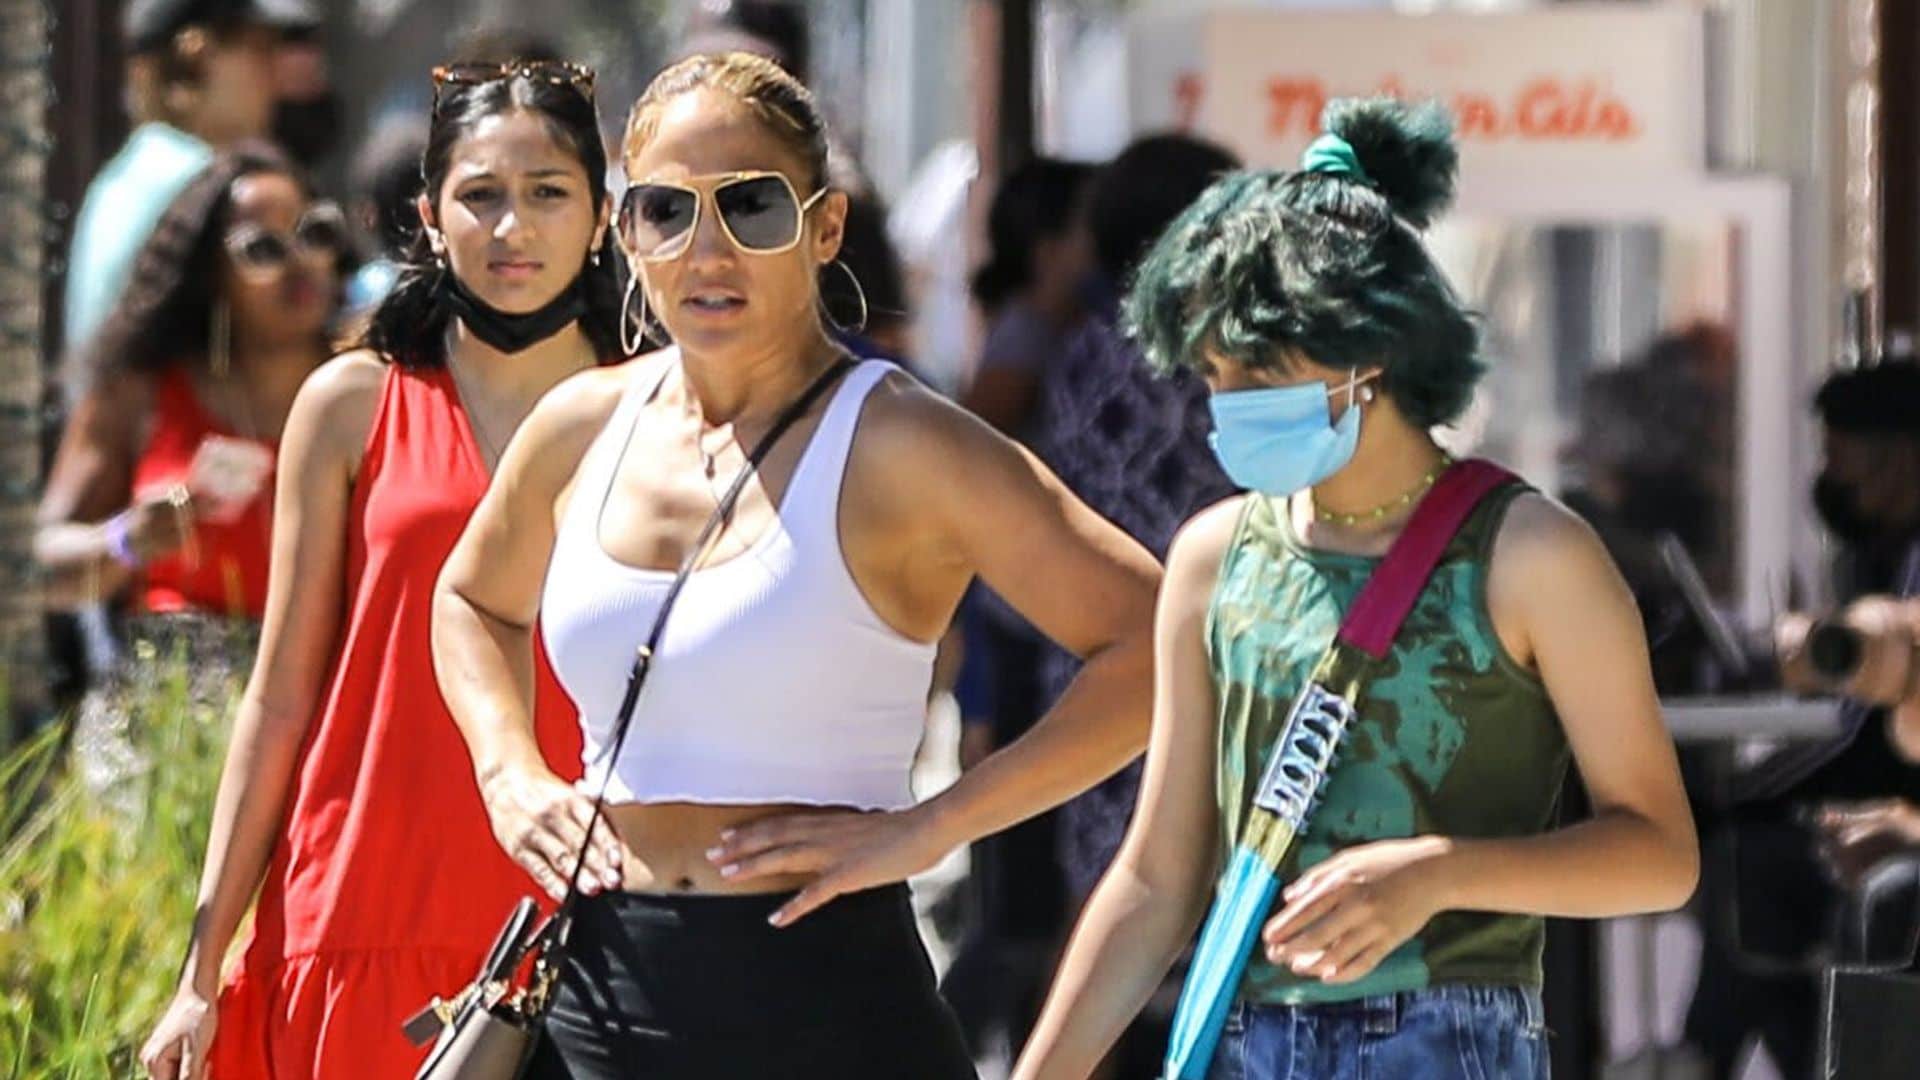 Jennifer Lopez showed off her toned body while shopping with daughter Emme